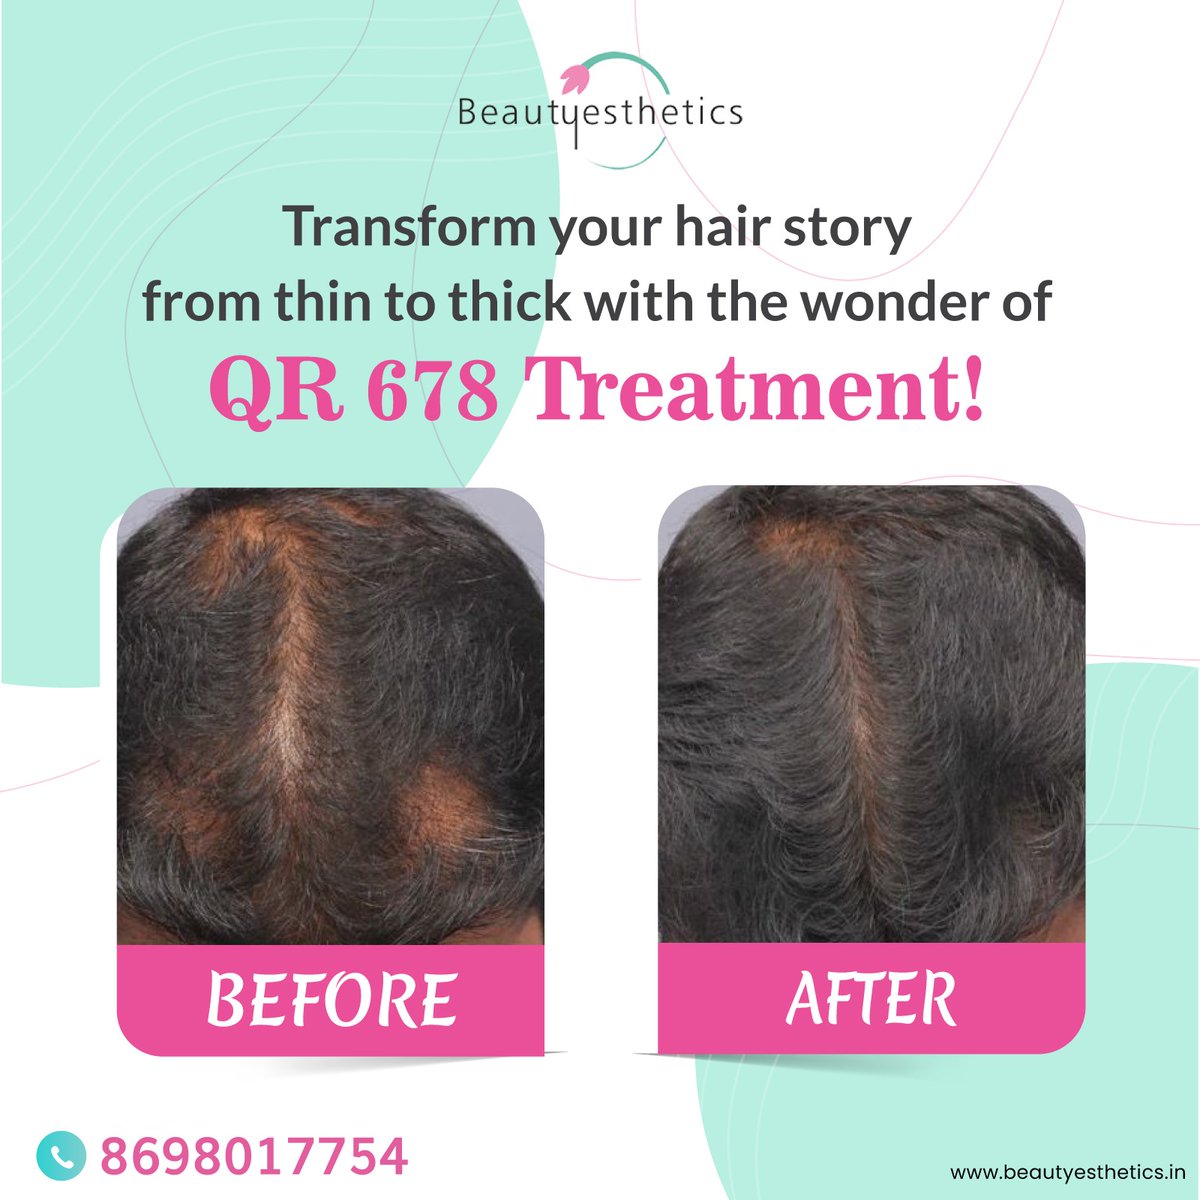 Dreaming of thicker, fuller hair? Let's turn that dream into a reality with QR 678. It's not just a treatment; it's a new beginning for your hair. Are you ready?

#QR678 #hairfall #antihairfall #hairgrowth #pune #beaityesthetics #ExploreMore